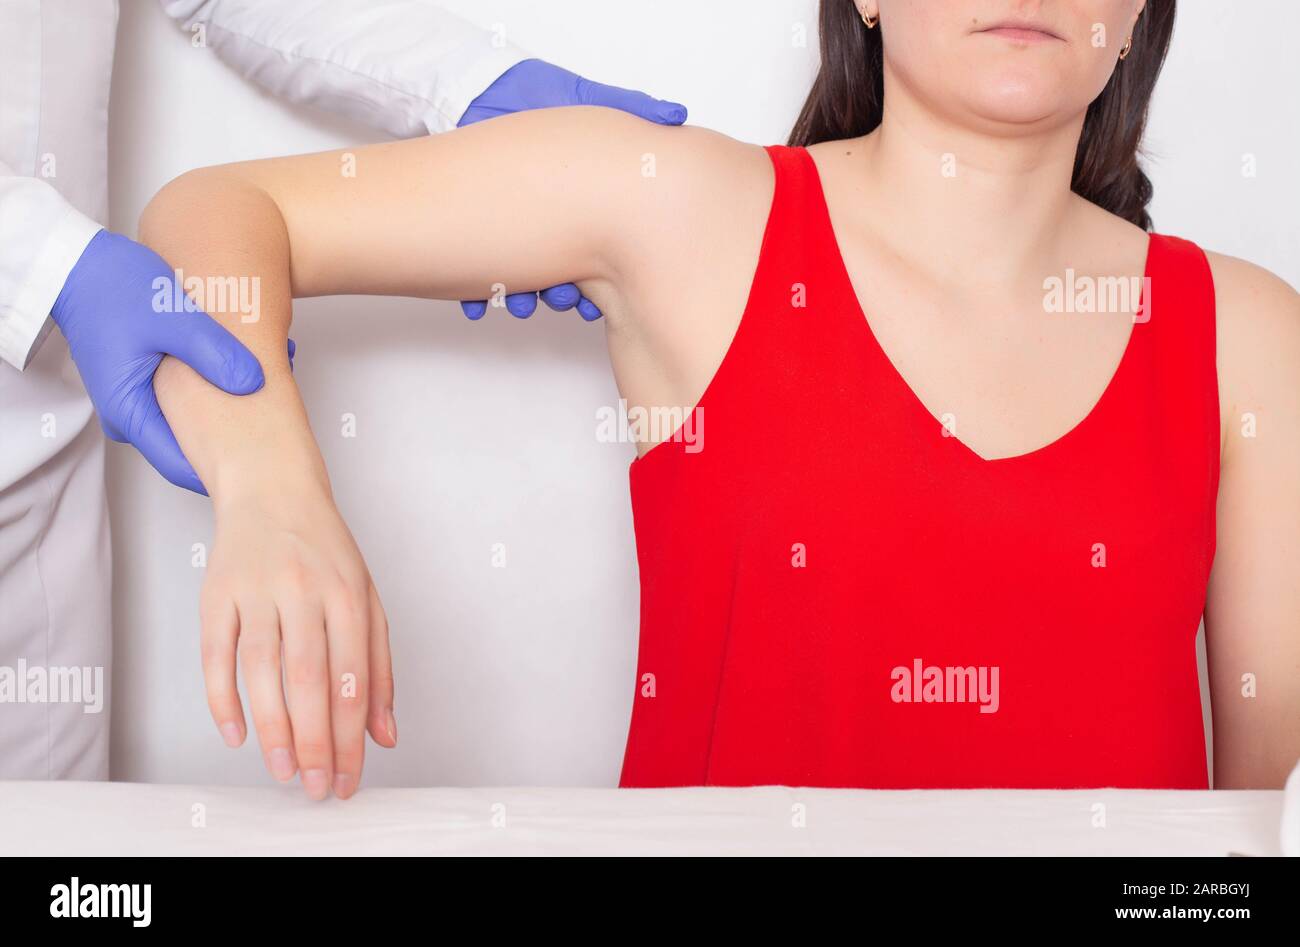 Doctor traumatologist examines a broken shoulder in a girl athlete. The concept of injury in athletes, dislocation of the shoulder, luxation Stock Photo